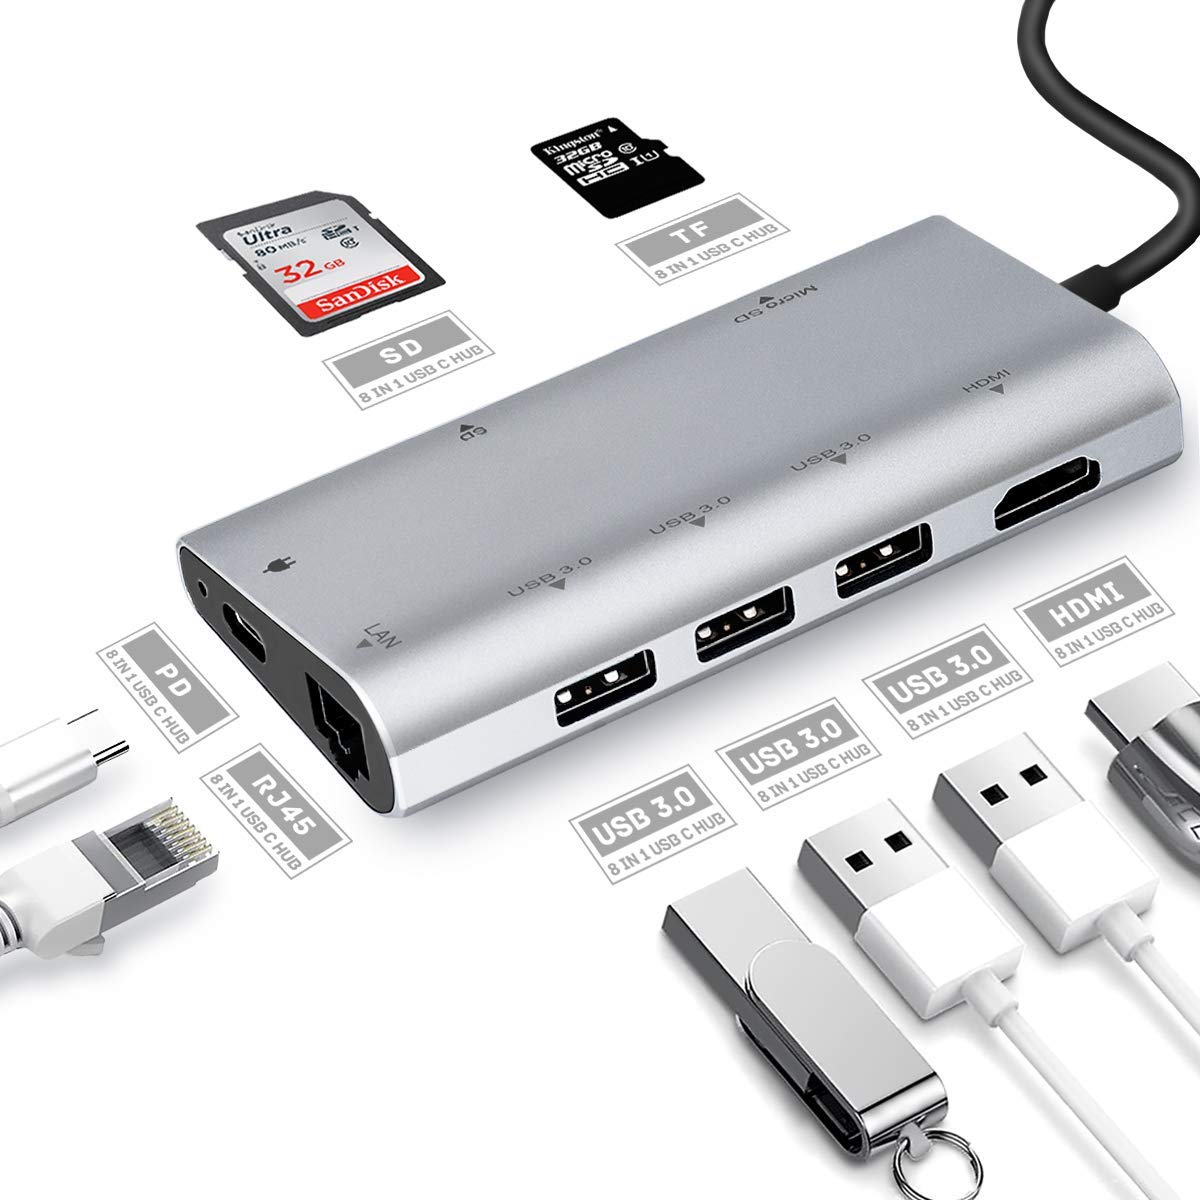 USB C Hub, 8 in 1 Multi-Port Type C Adapter Thunderbolt 3 with Type C PD 2.0 Charging Port, HDMI Output,3 USB 3.0 Ports, Gigabit Ethernet Port,SD/MicroSD...